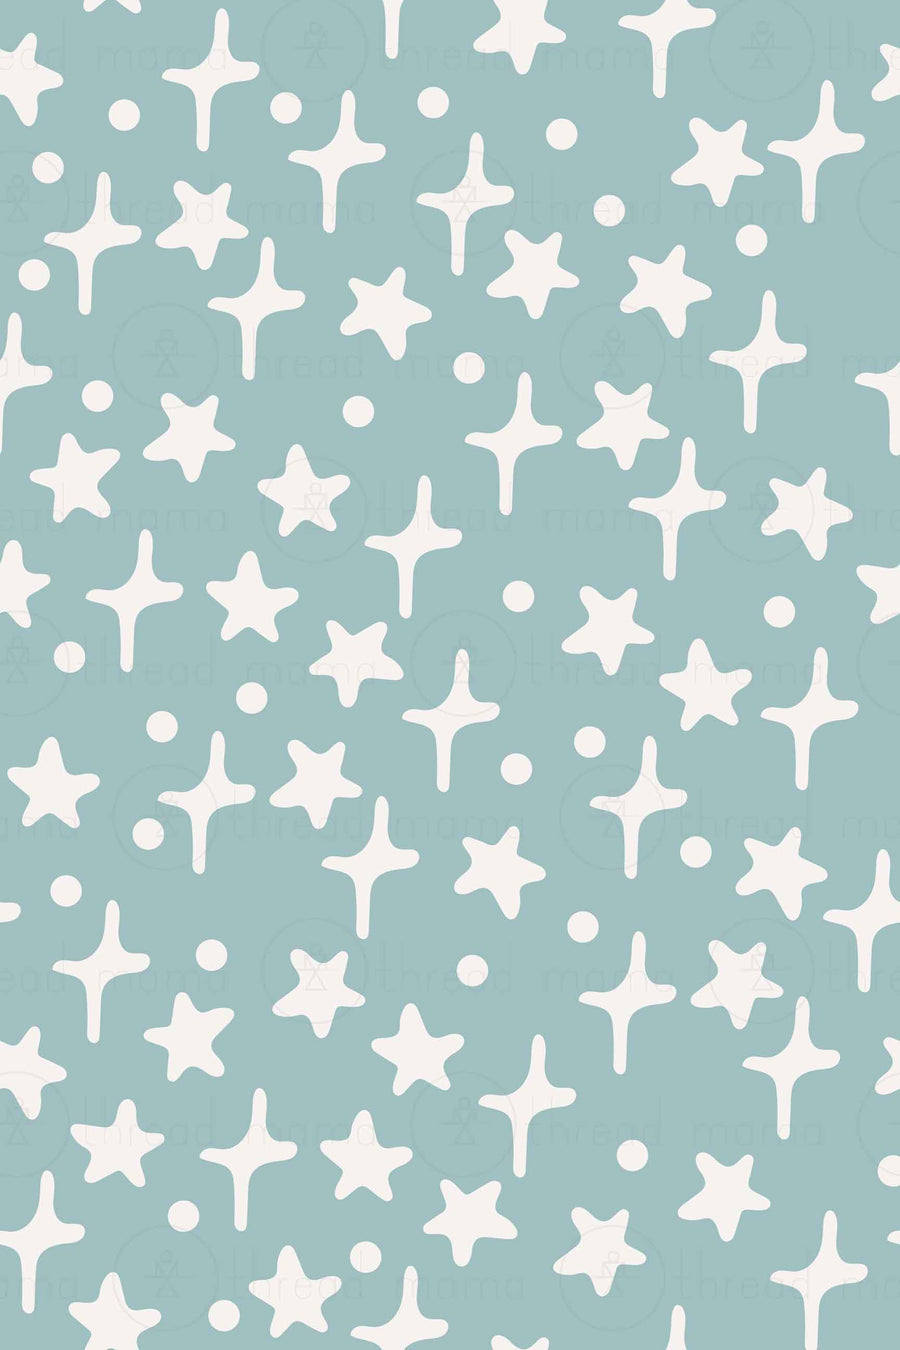 Background Pattern #59 (Printable Poster)